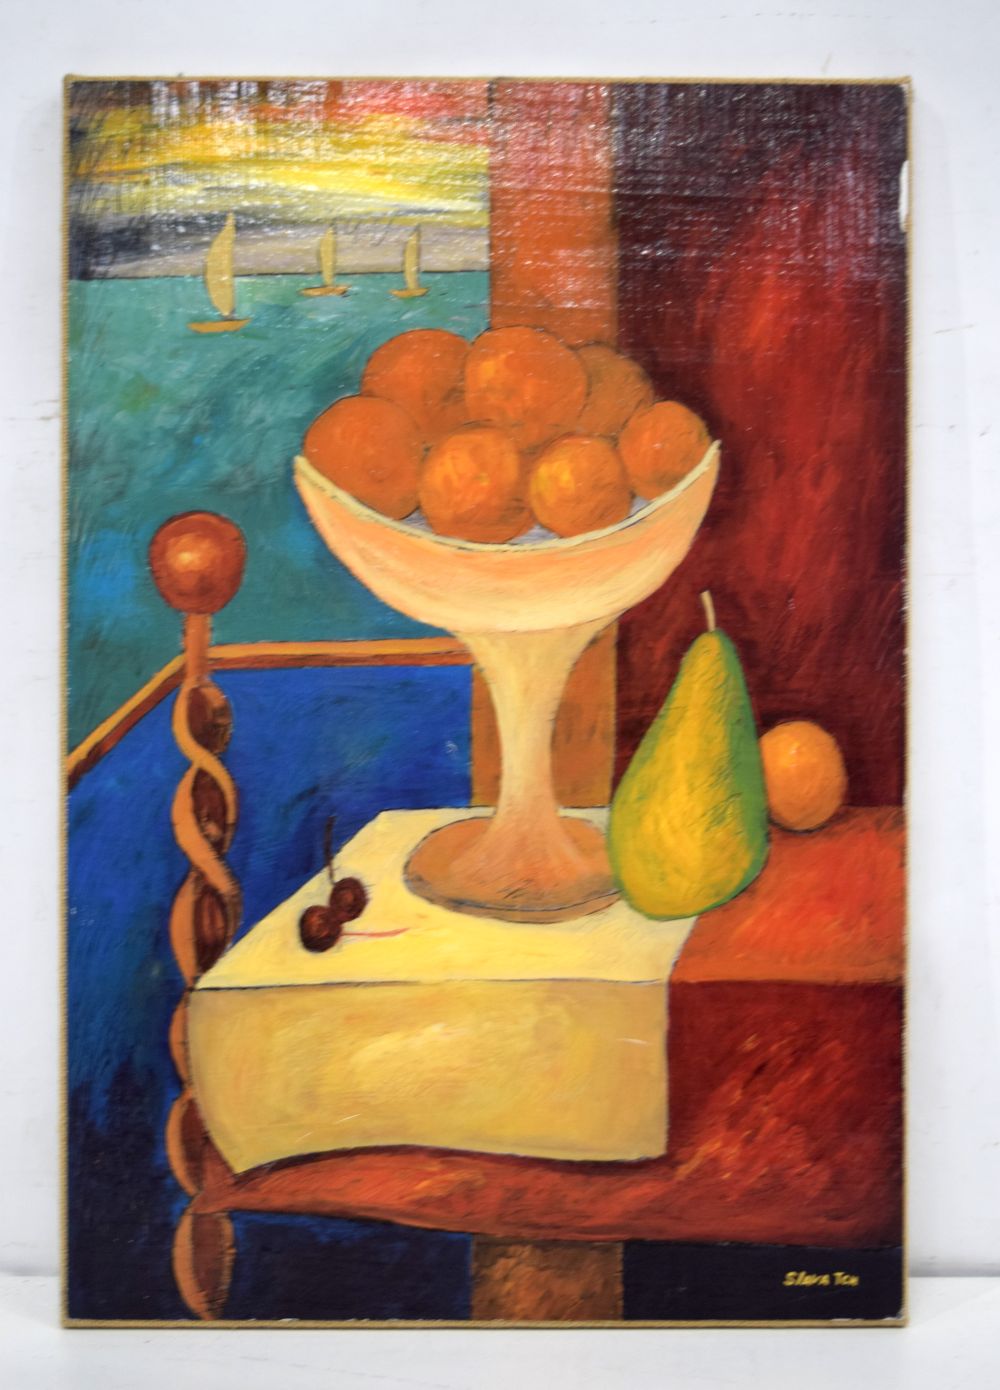 An oil on linen by Slava Tch of a bowl of fruit and a window view of the sea. 62 x 42cm.